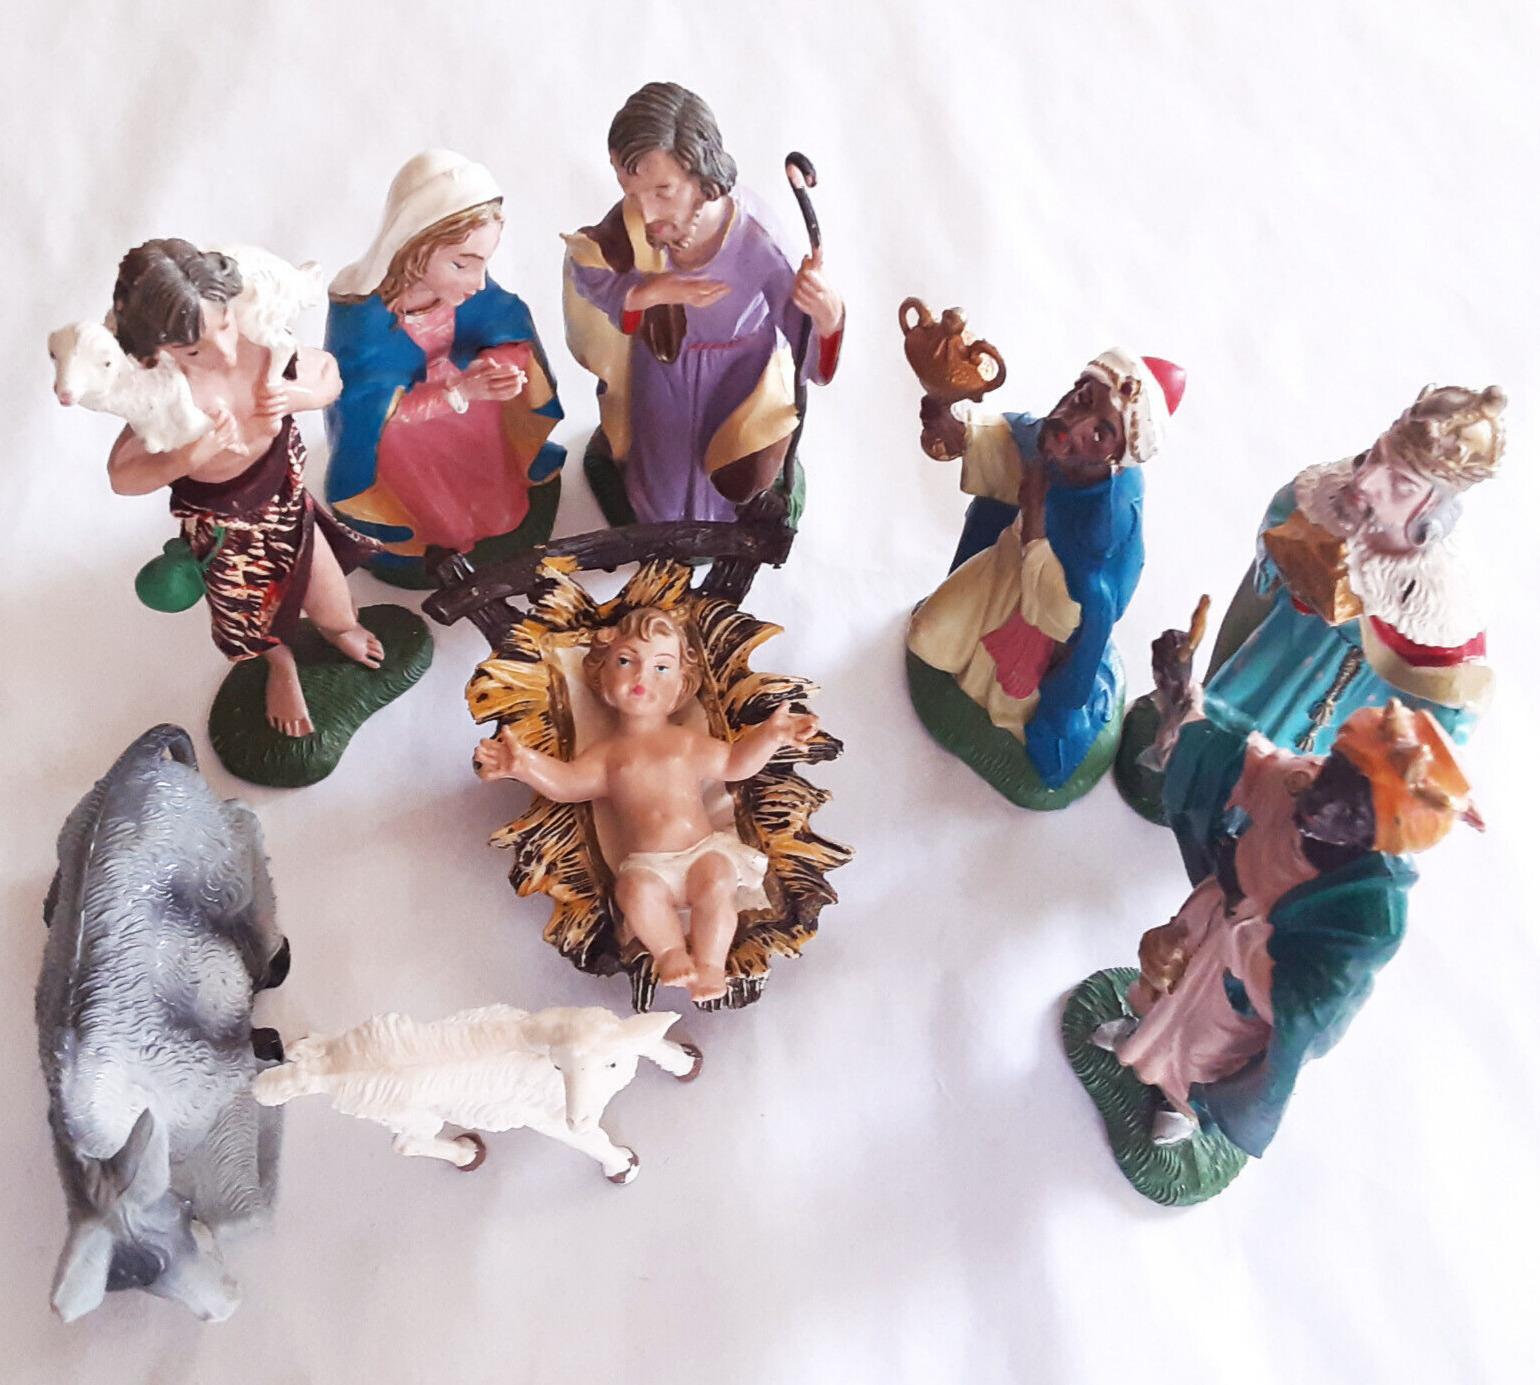 VTG Fontanini 10 Piece Made In Italy Small Nativity Figurines For Manger Scene